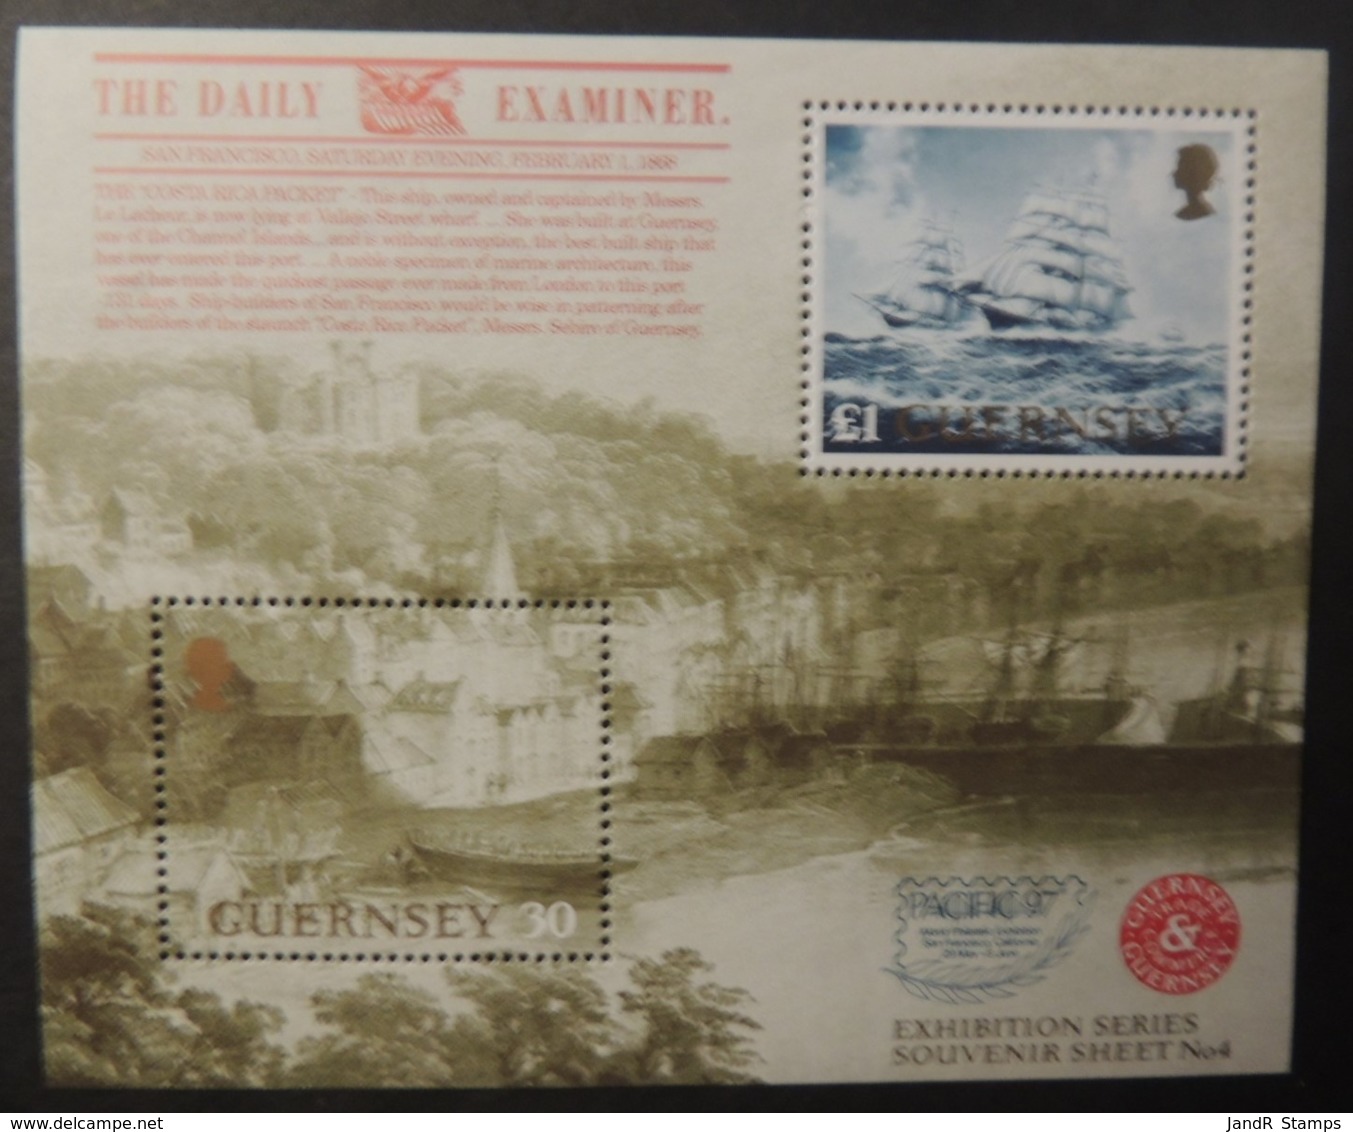 GUERNSEY 1997 PACIFIC 97 PHILATELIC STAMP EXHIBITION MINIATURE SHEET MS740 MNH 1 VALUE HARBOUR SHIPS - Guernsey